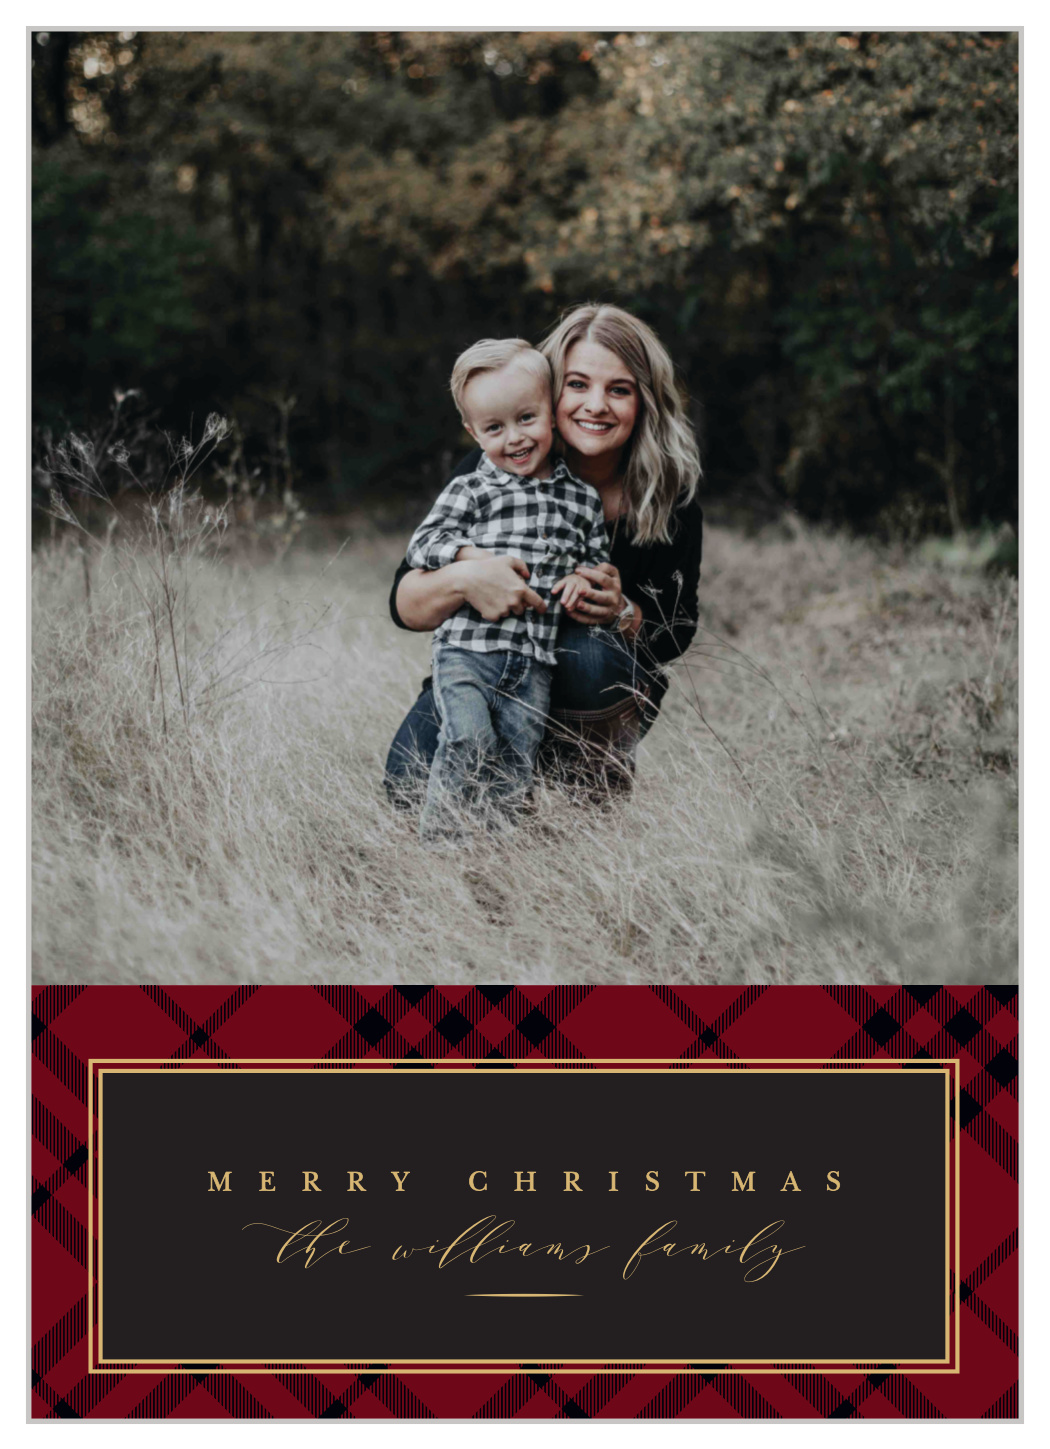 Country Club Christmas Cards